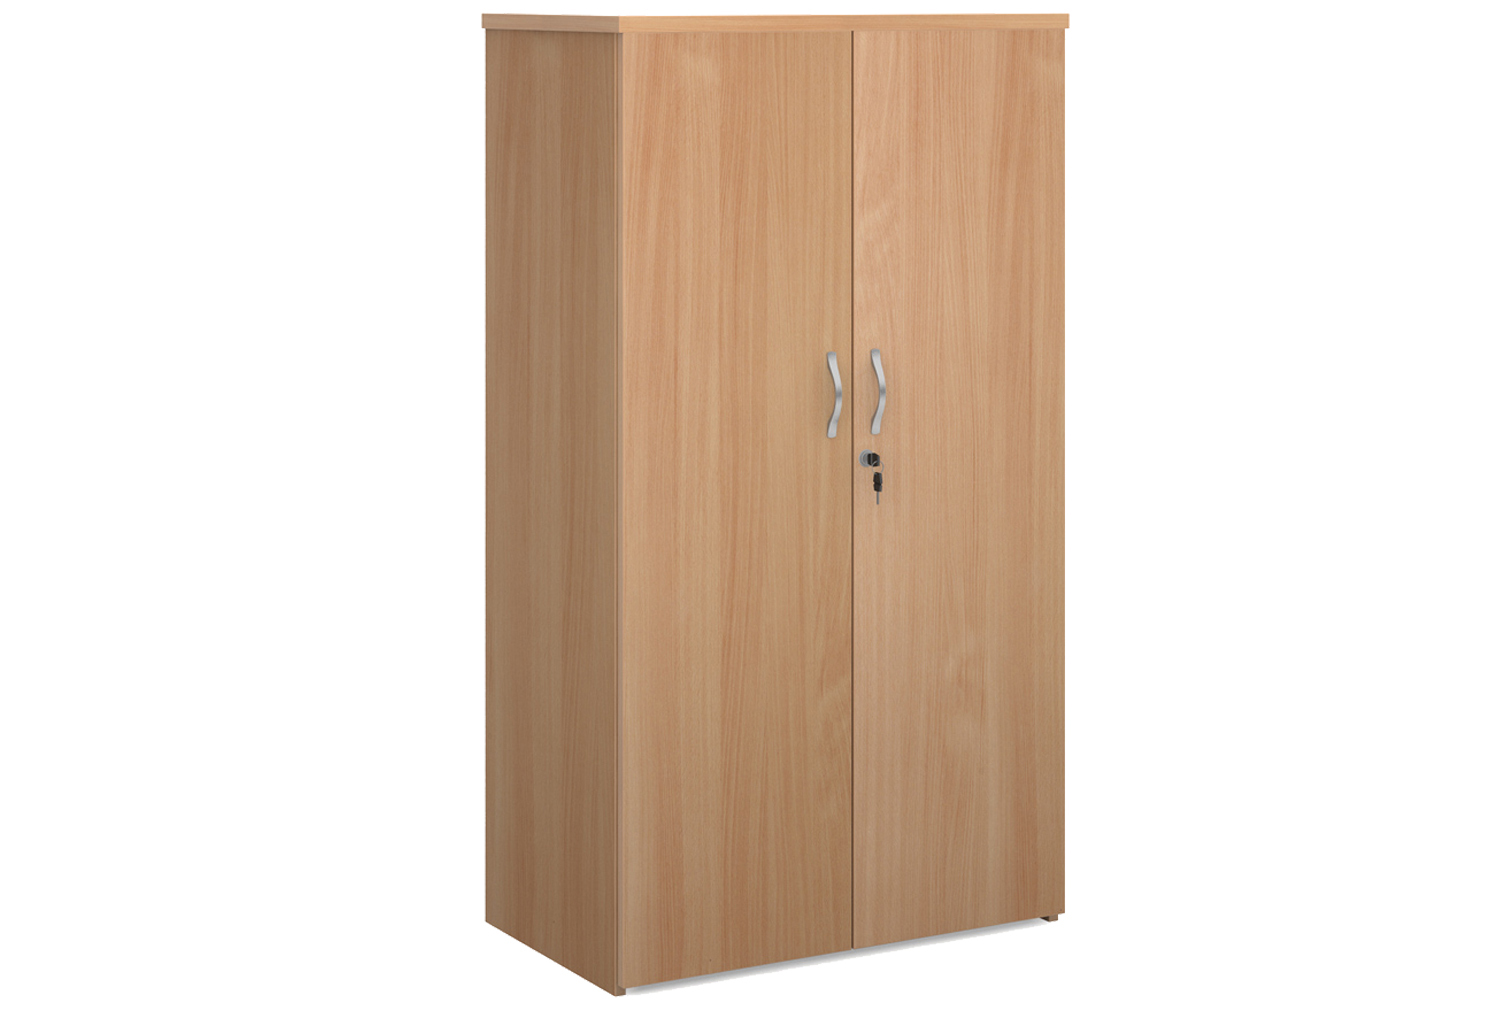 Thrifty Next-Day Double Door Cupboards Beech, 3 Shelf - 80wx47dx144h (cm), Express Delivery